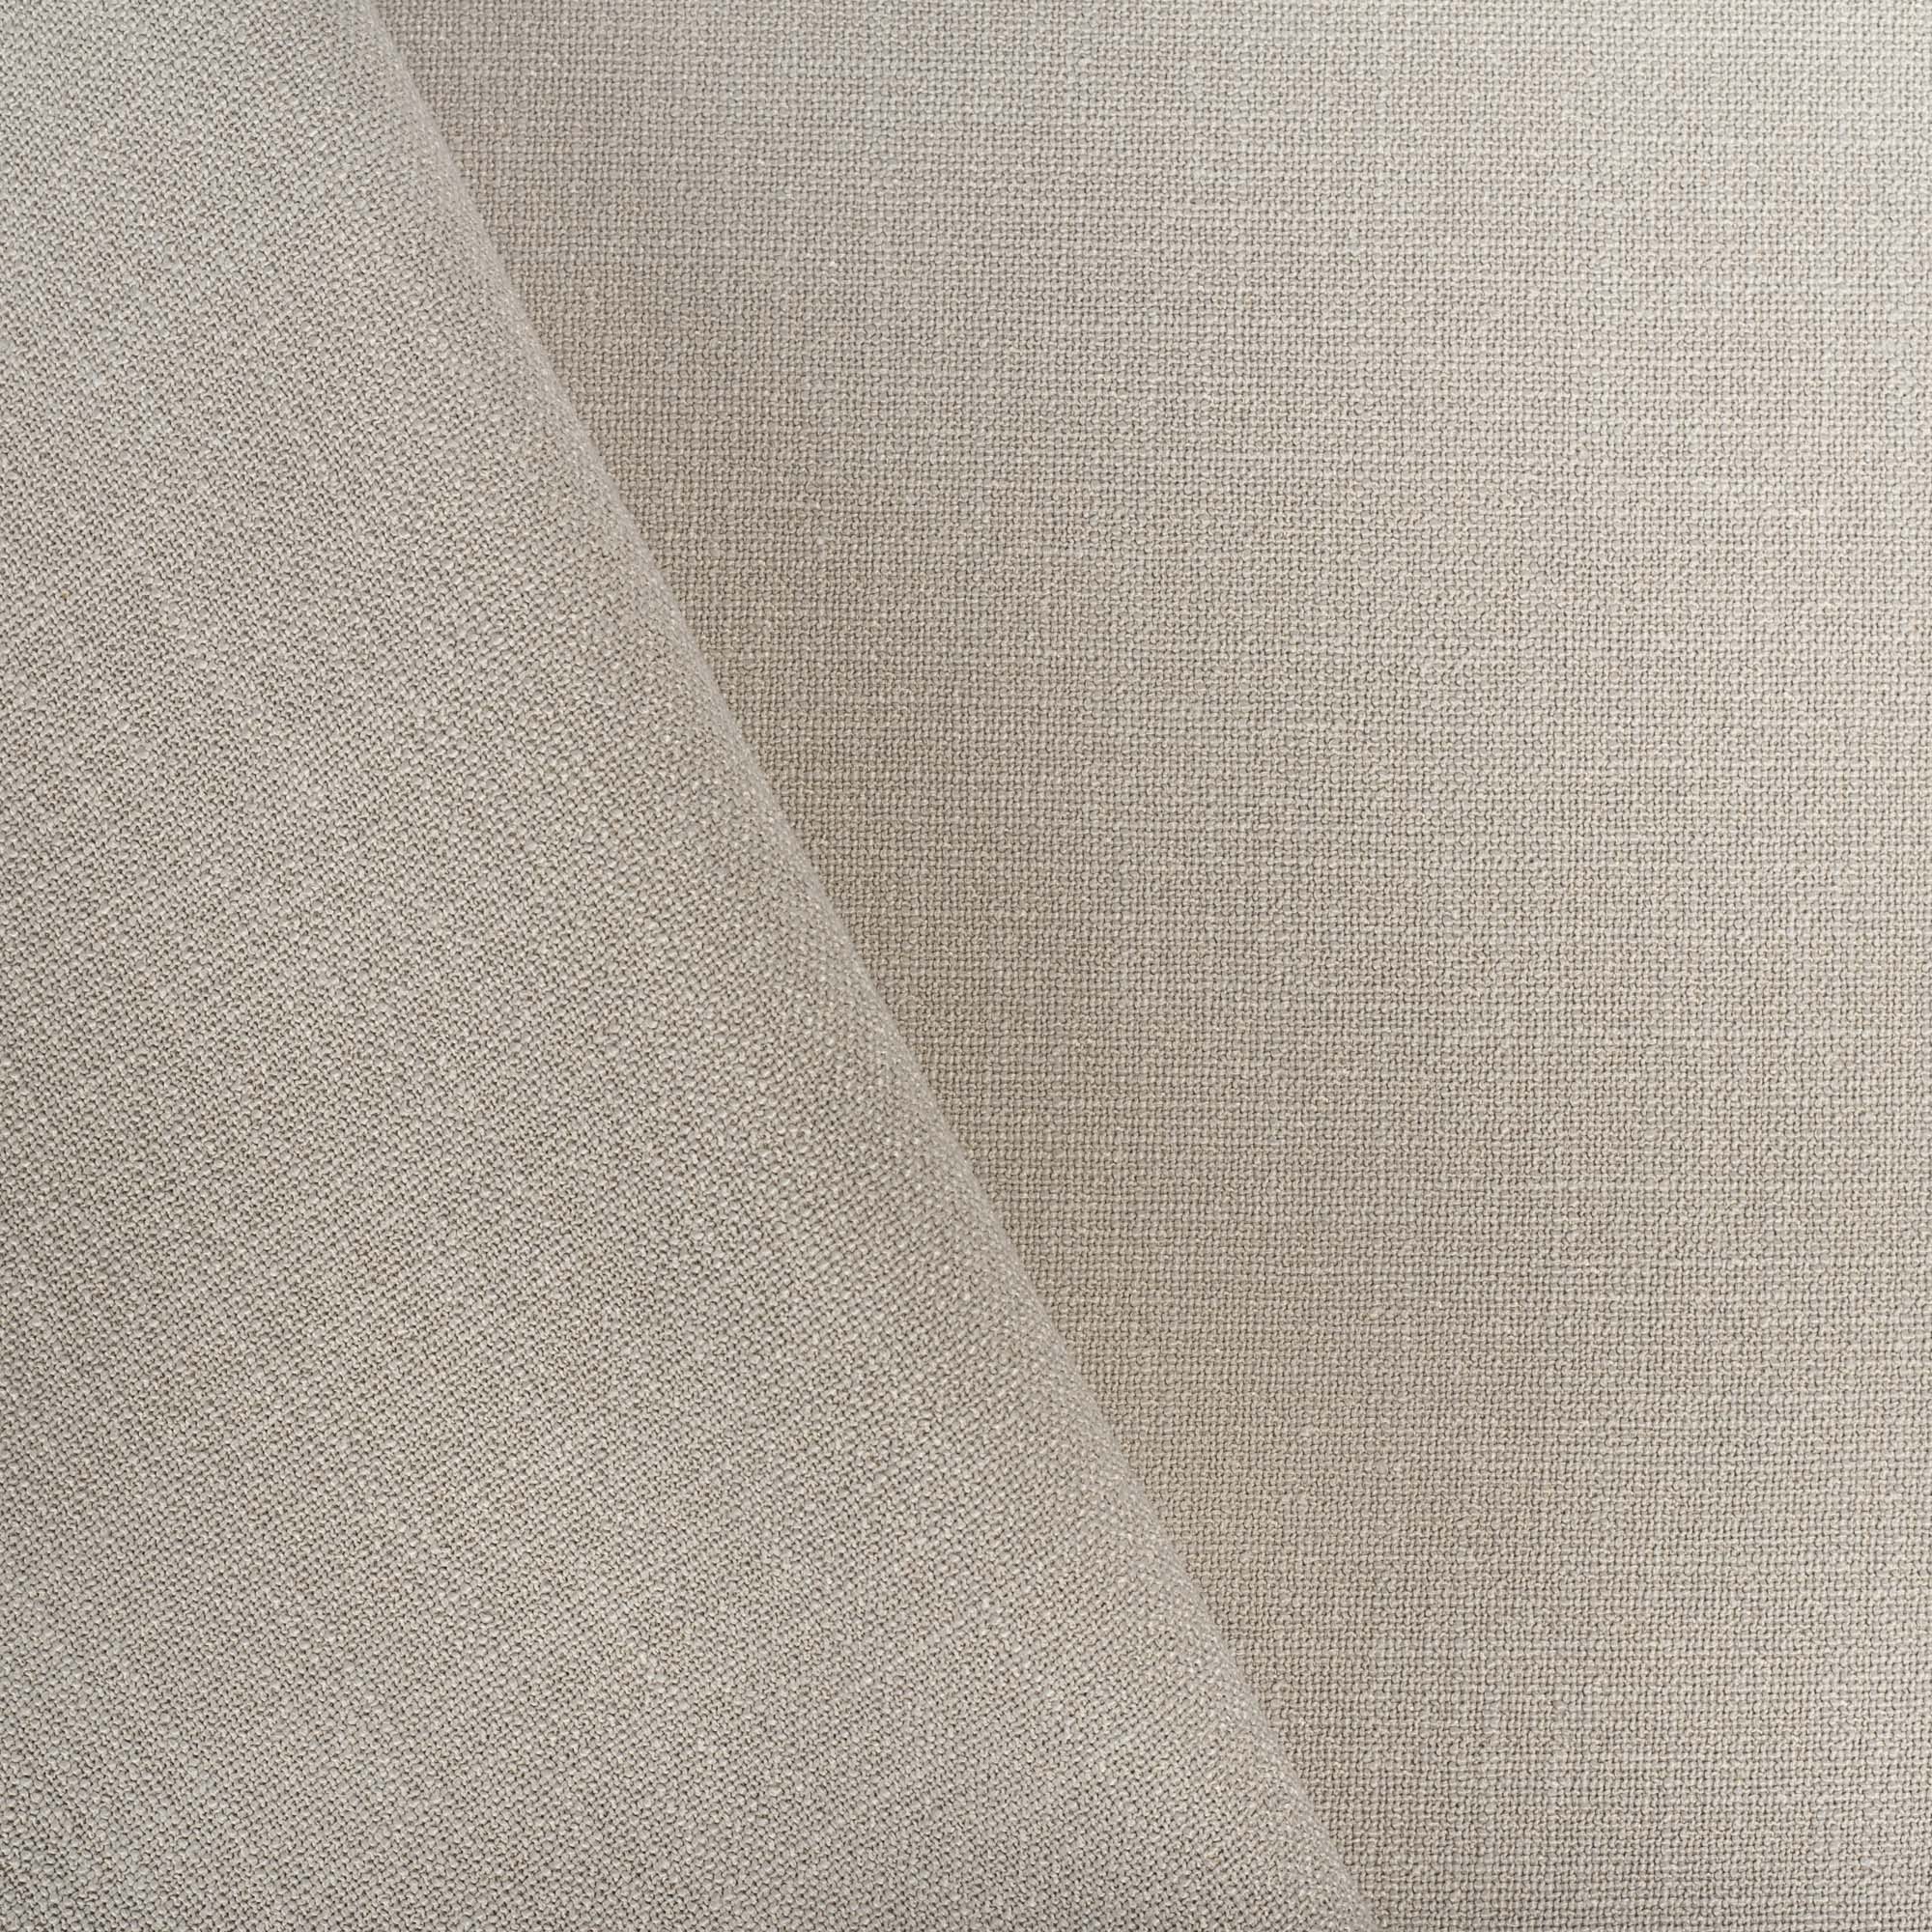 Grange Fabric Pumice, an earthy grey high performance upholstery fabric : close up view